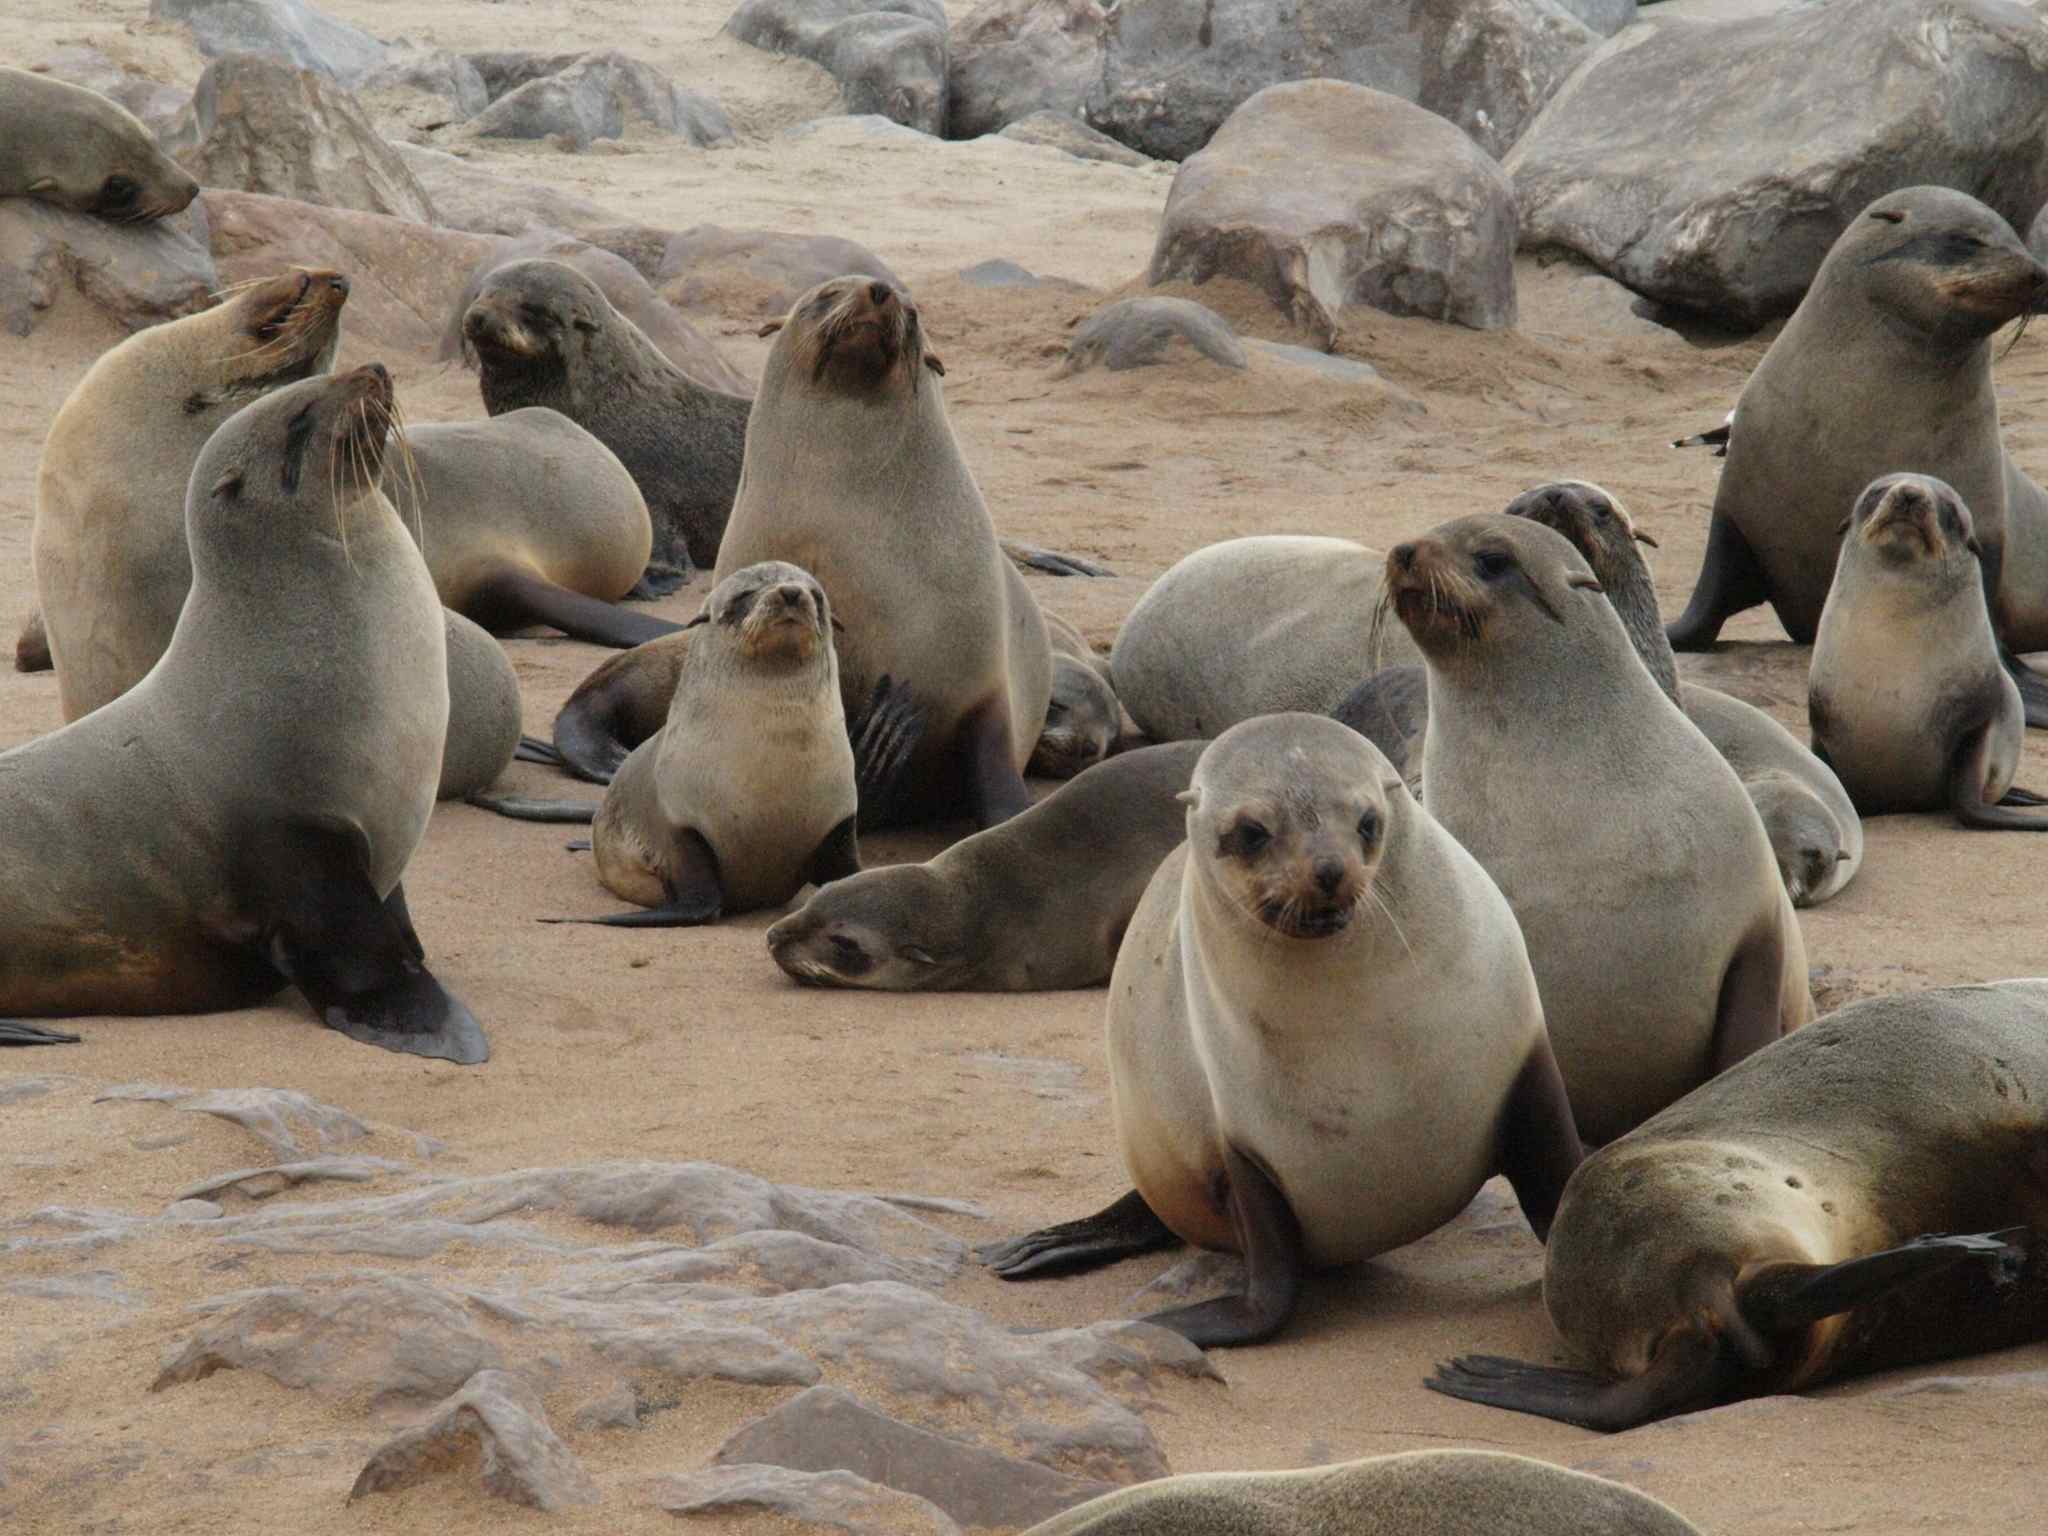 Seal, Cape Cross, Namibia: Much Better Adventures/Ruth Howarth